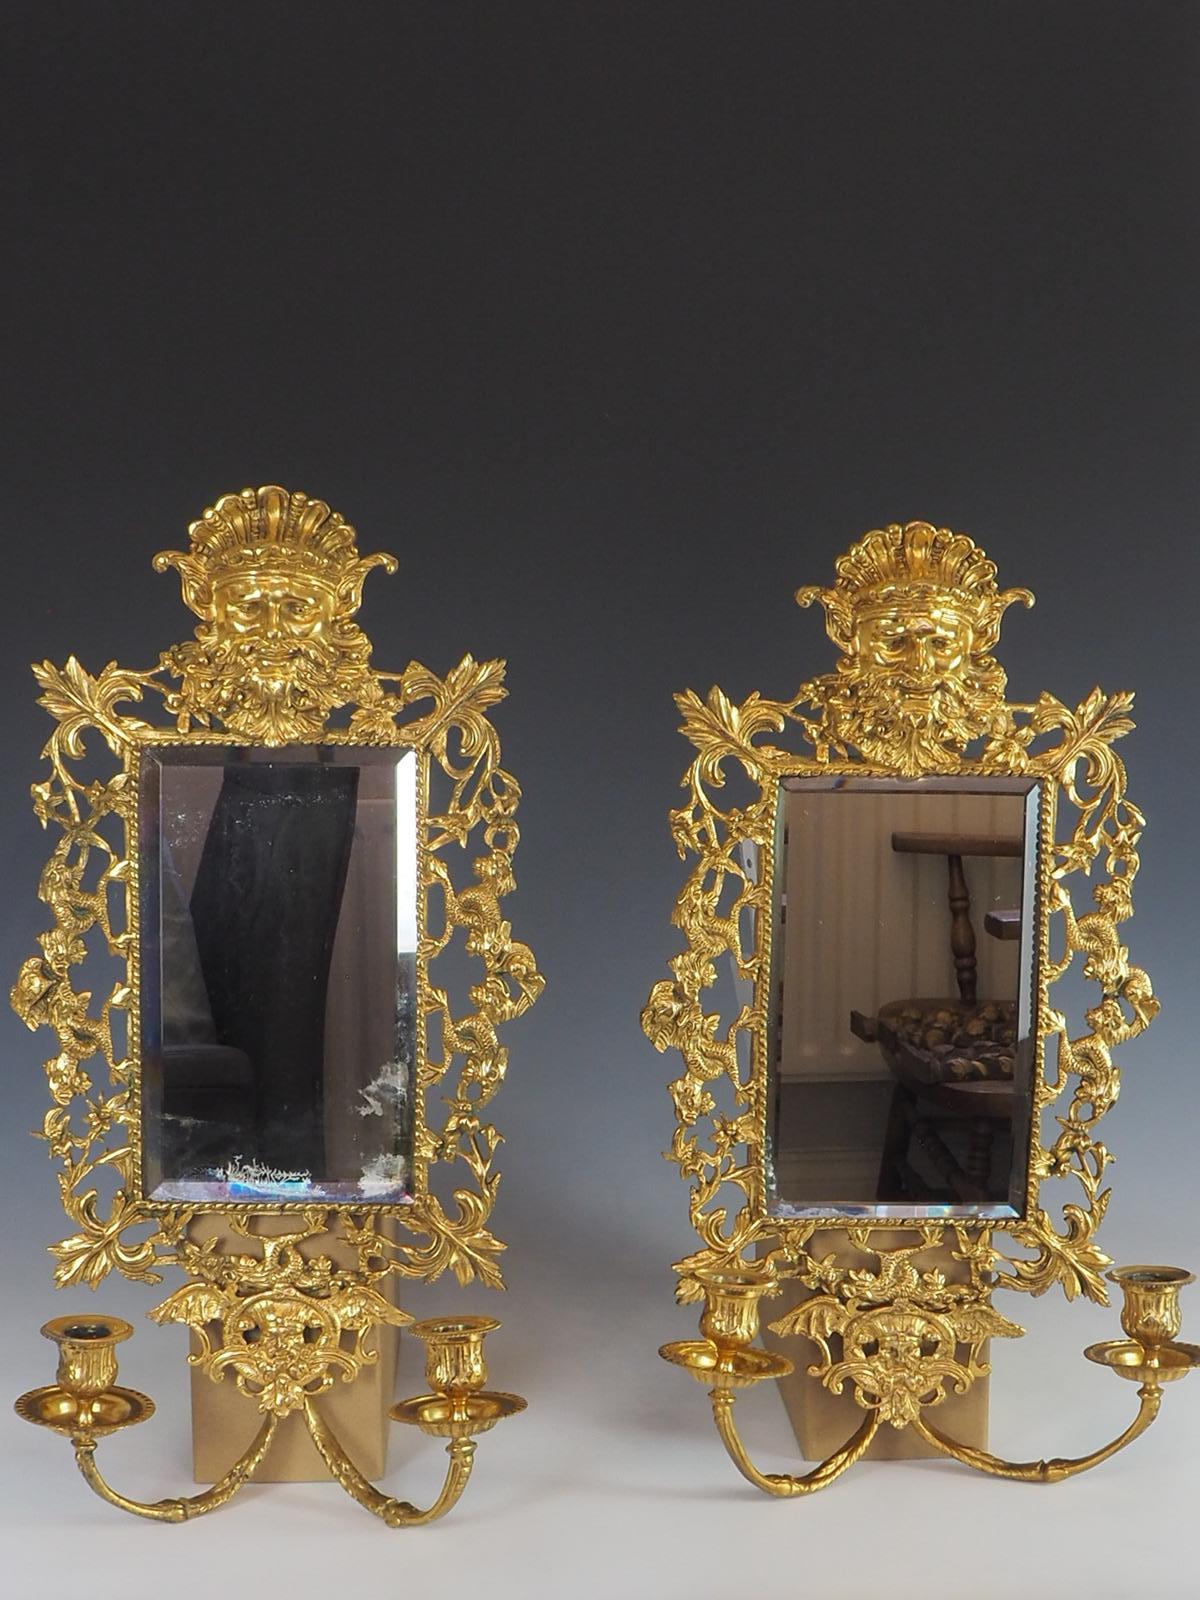 Pair of 19th Century Neptune & Mythical Grotesque 'Girandole' Bronze Mirrors For Sale 8